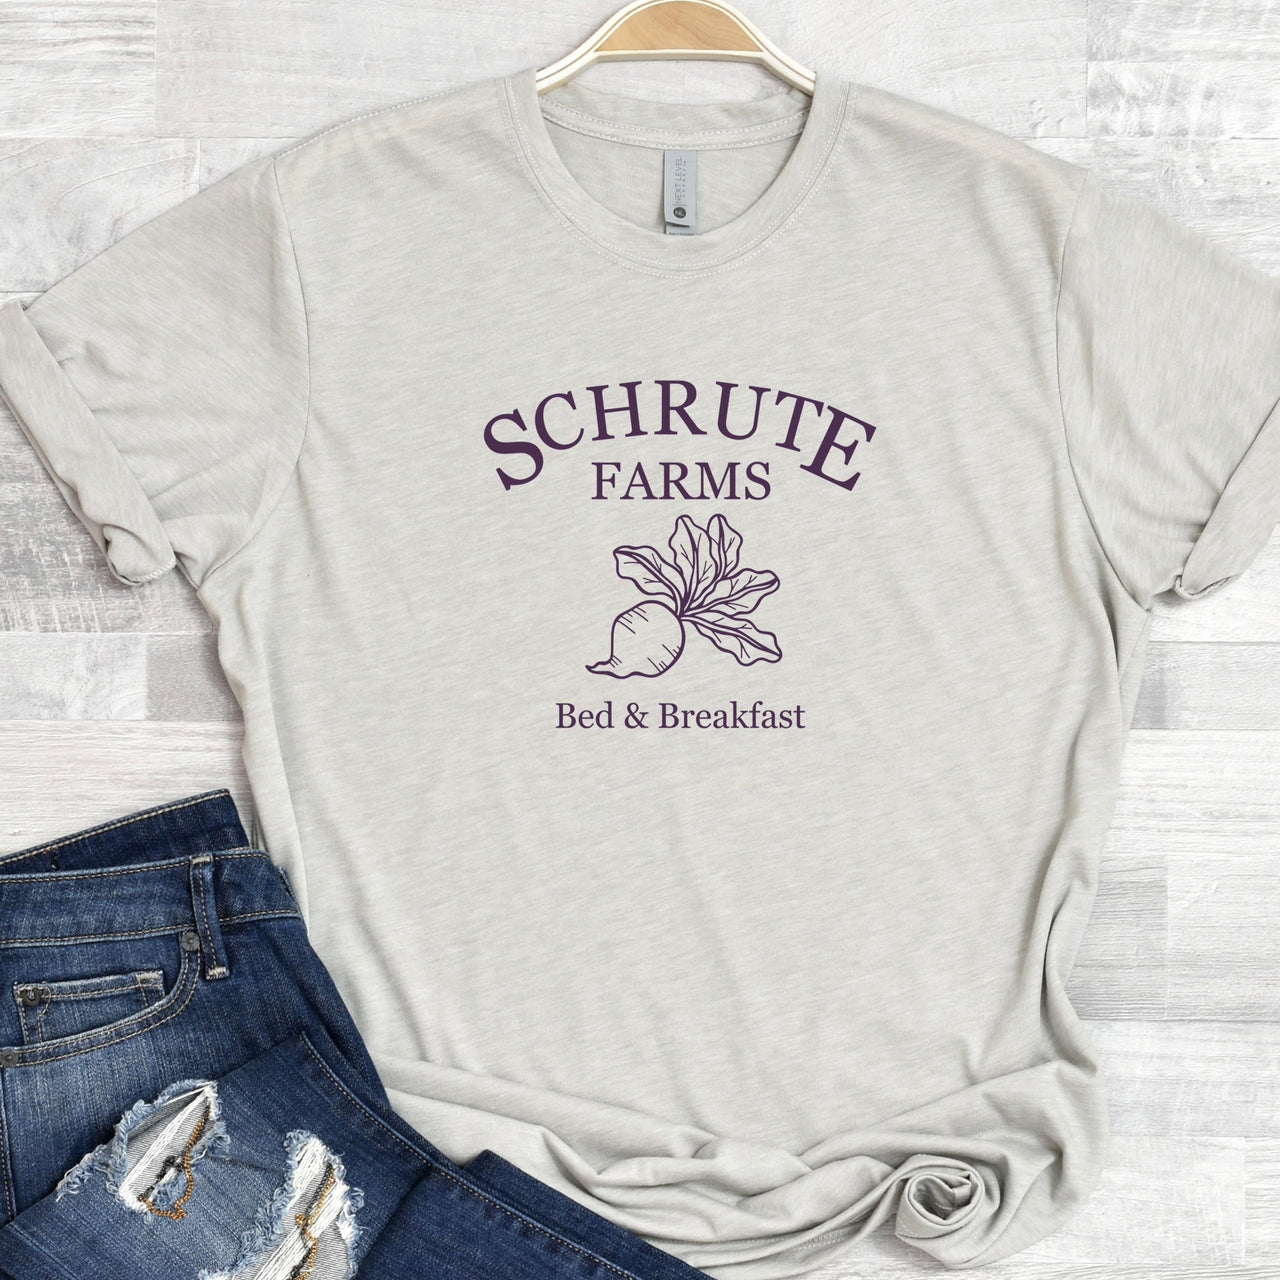 Schrute Farms Short-Sleeved Unisex Tee